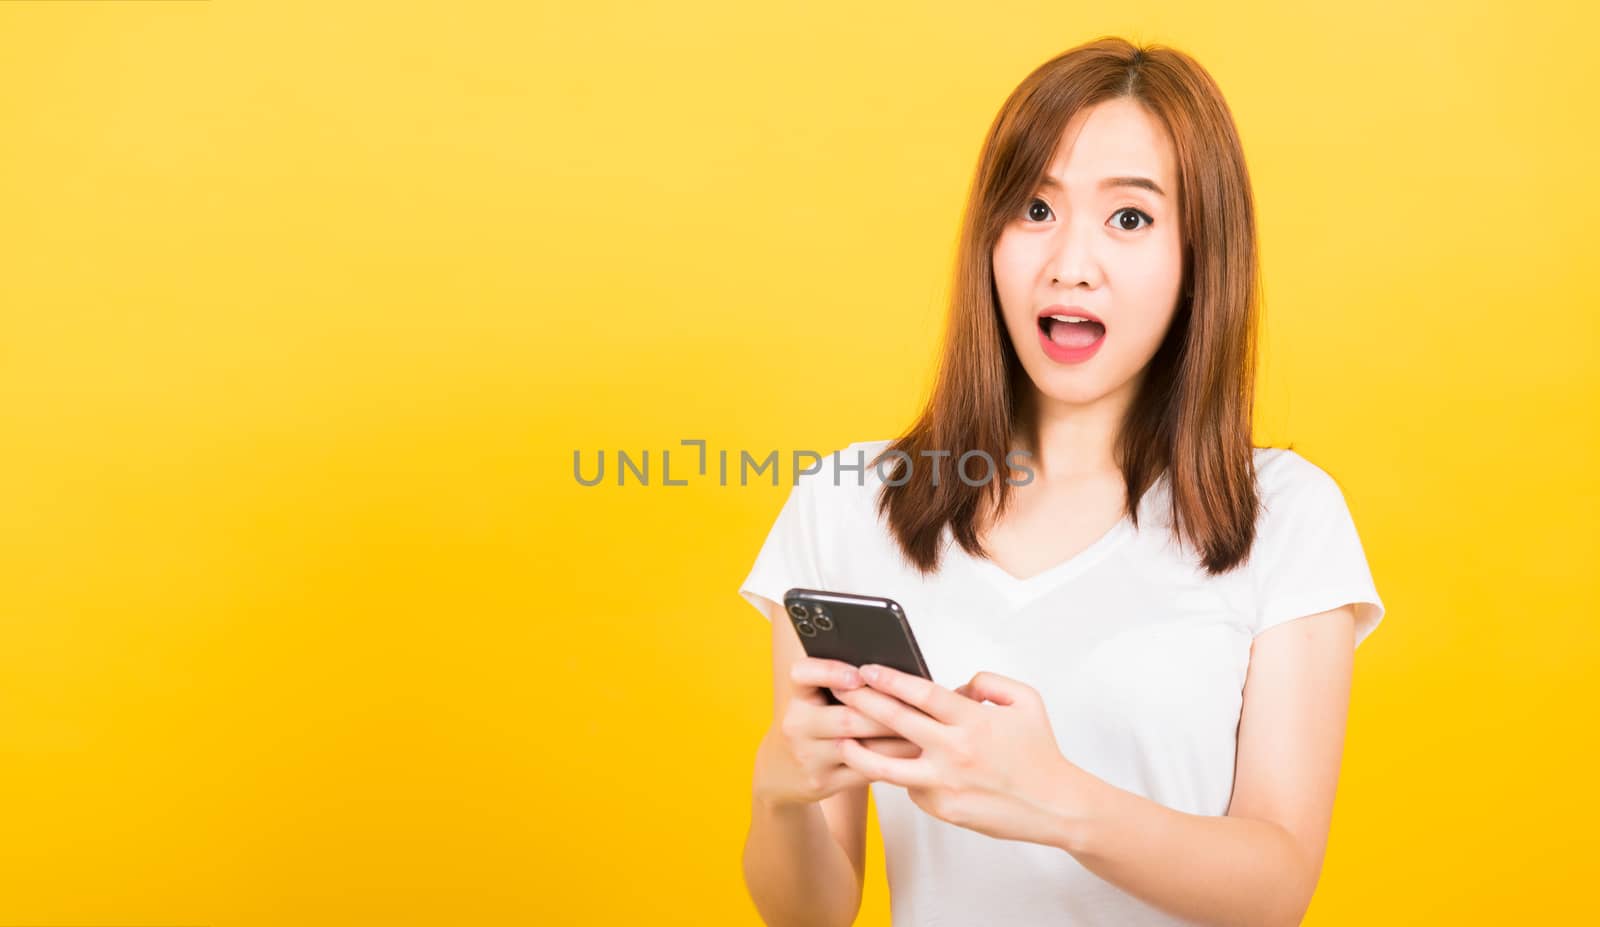 Asian happy portrait beautiful cute young woman teen smiling standing wear t-shirt her surprised excited with smart mobile phone looking camera isolated, studio shot yellow background with copy space